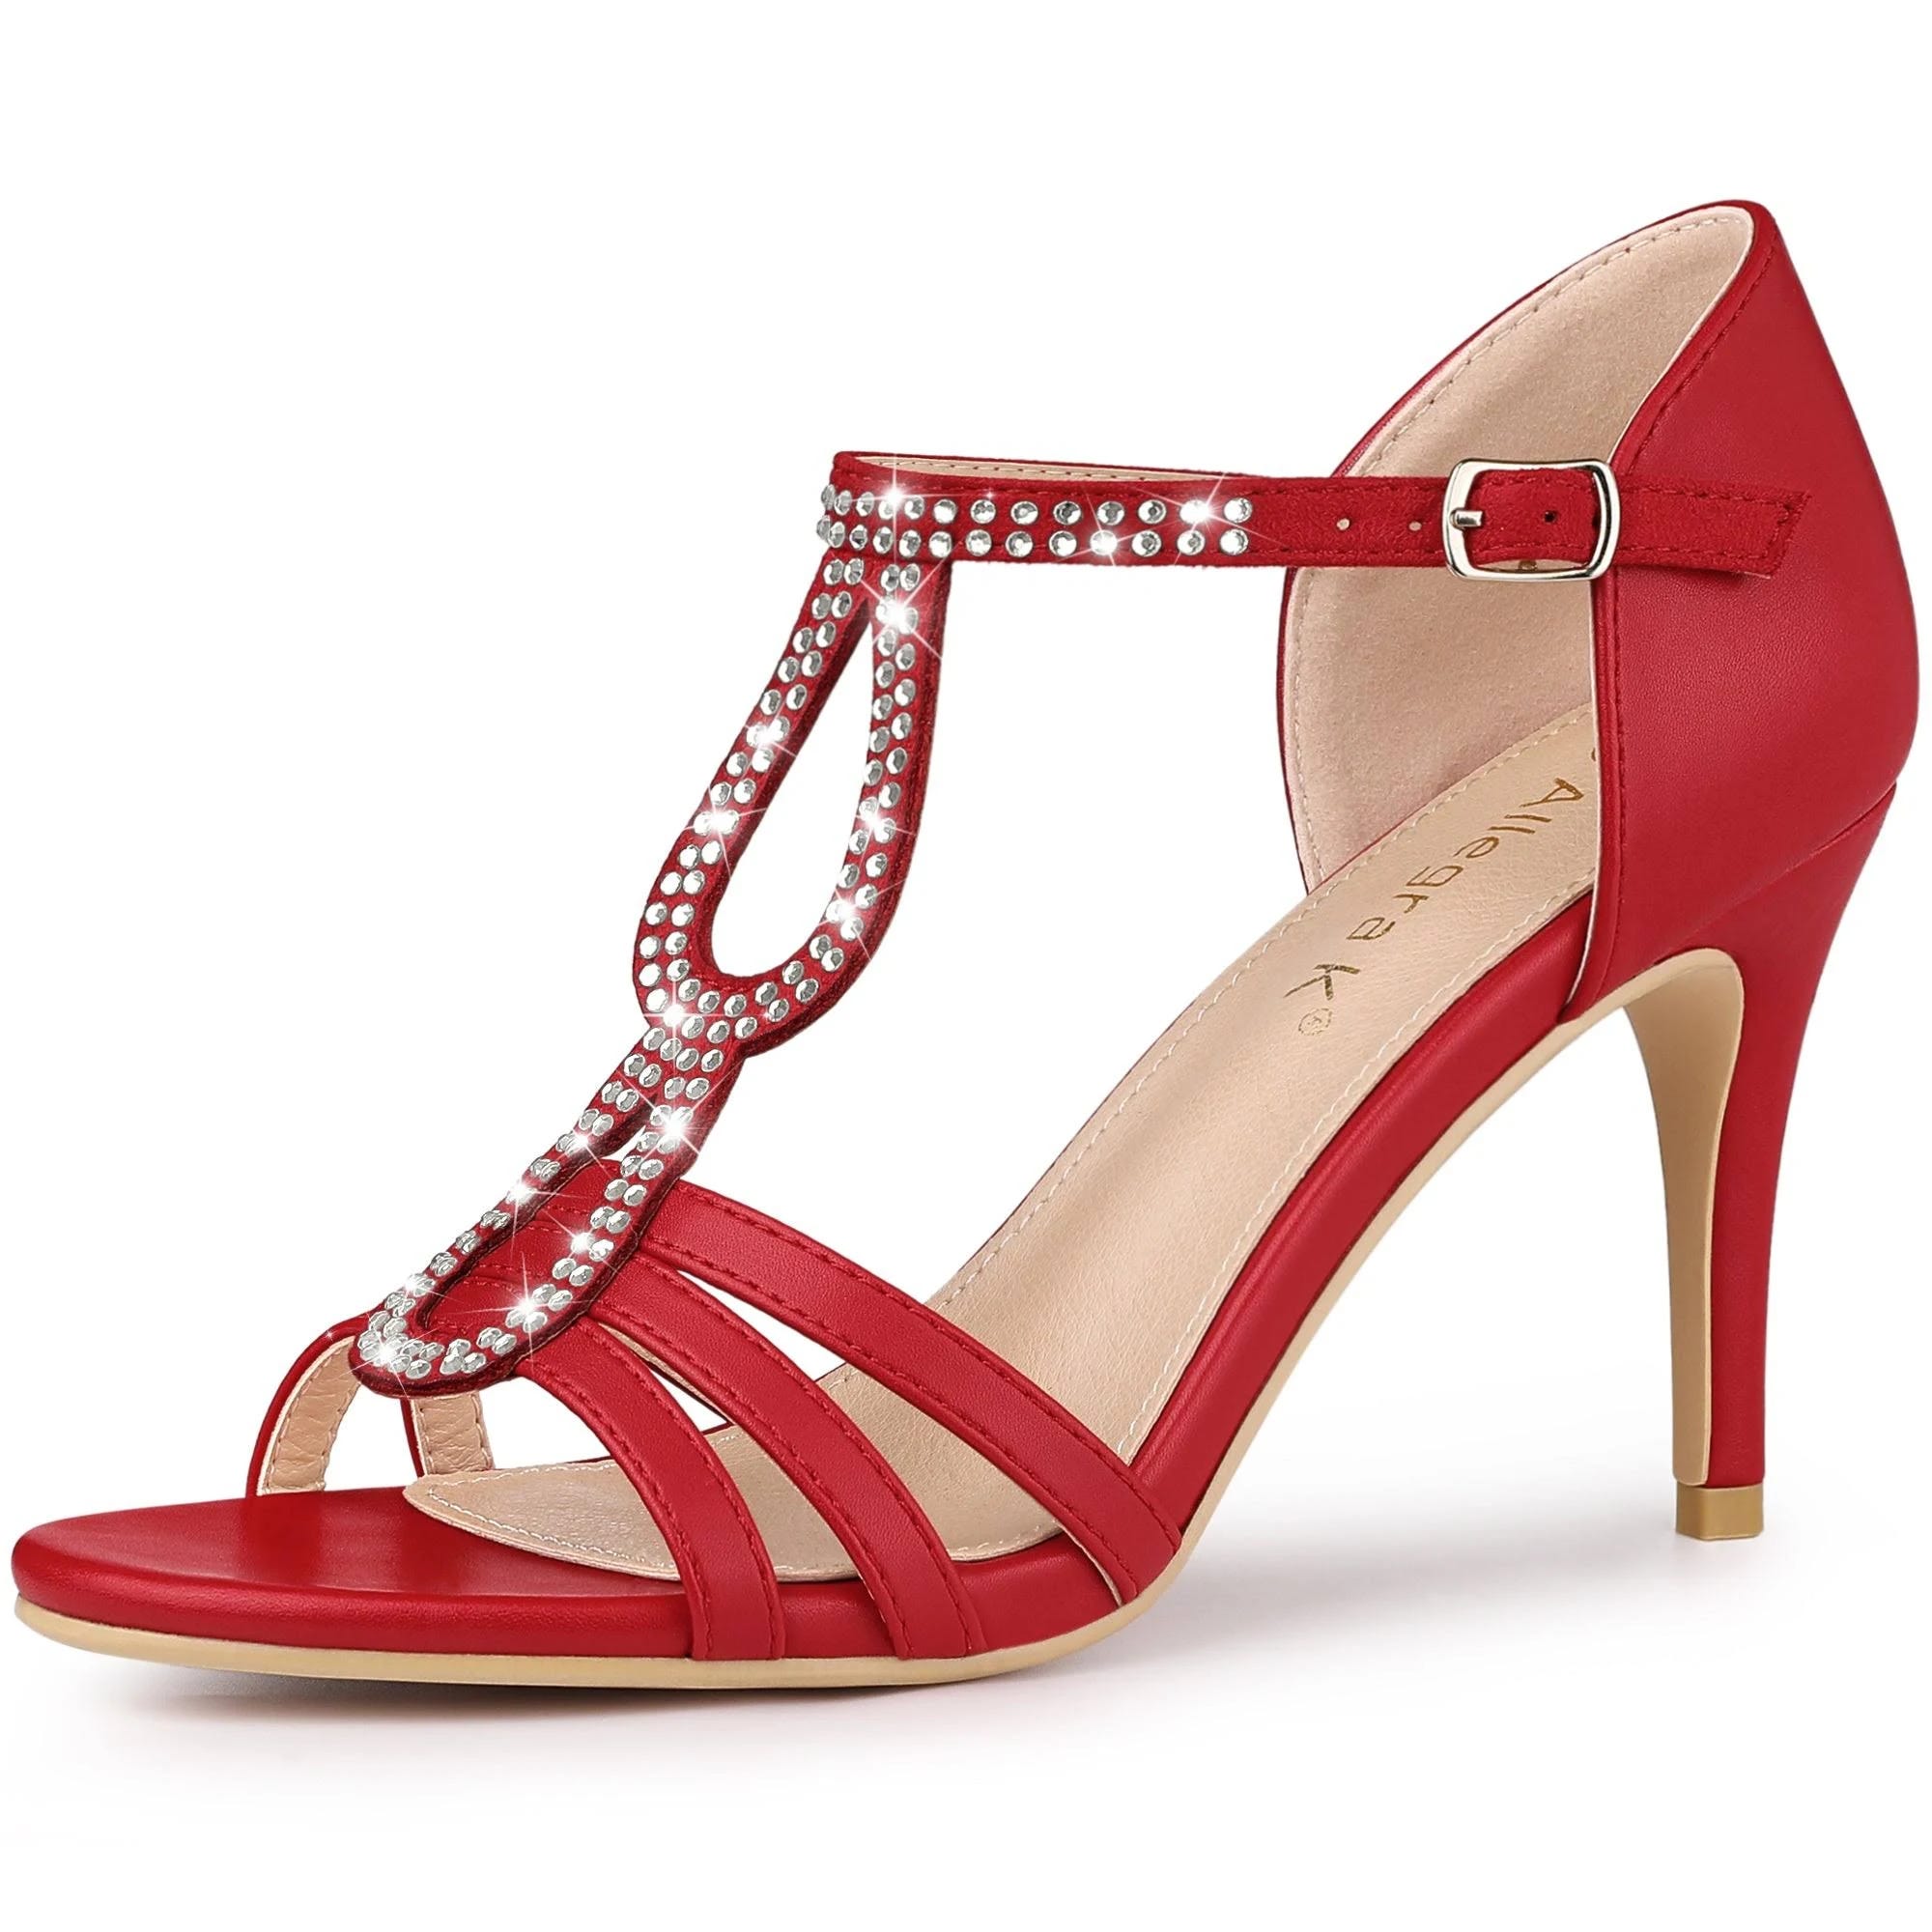 Sparkly, High-Heeled Stiletto Sandals for a Glamorous Look | Image